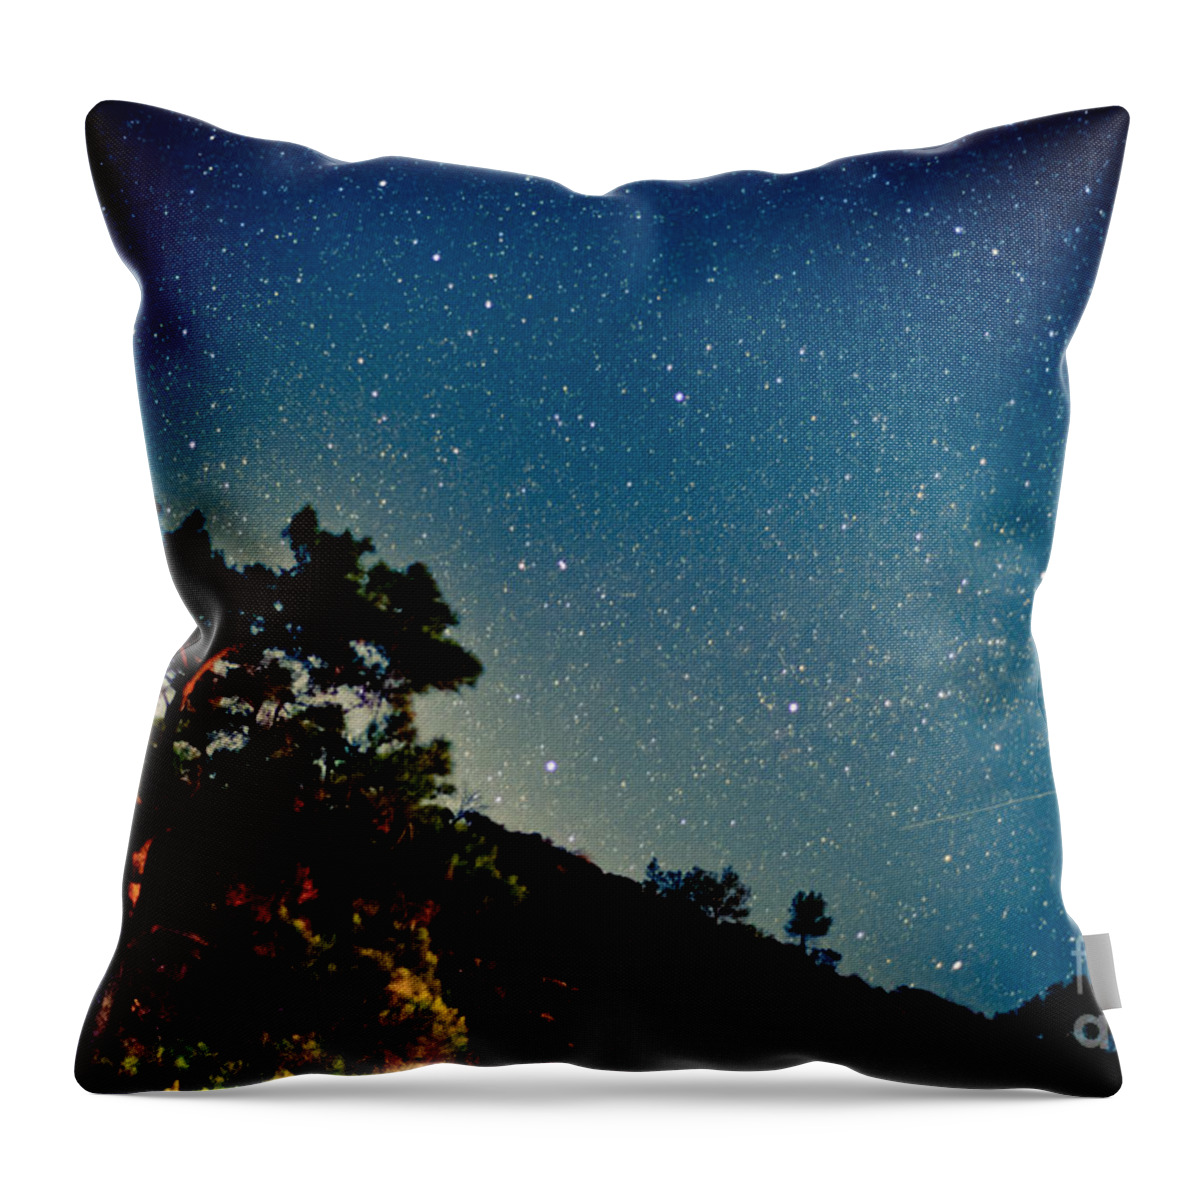 Tree Throw Pillow featuring the photograph Night sky scene with pine and stars by Raimond Klavins